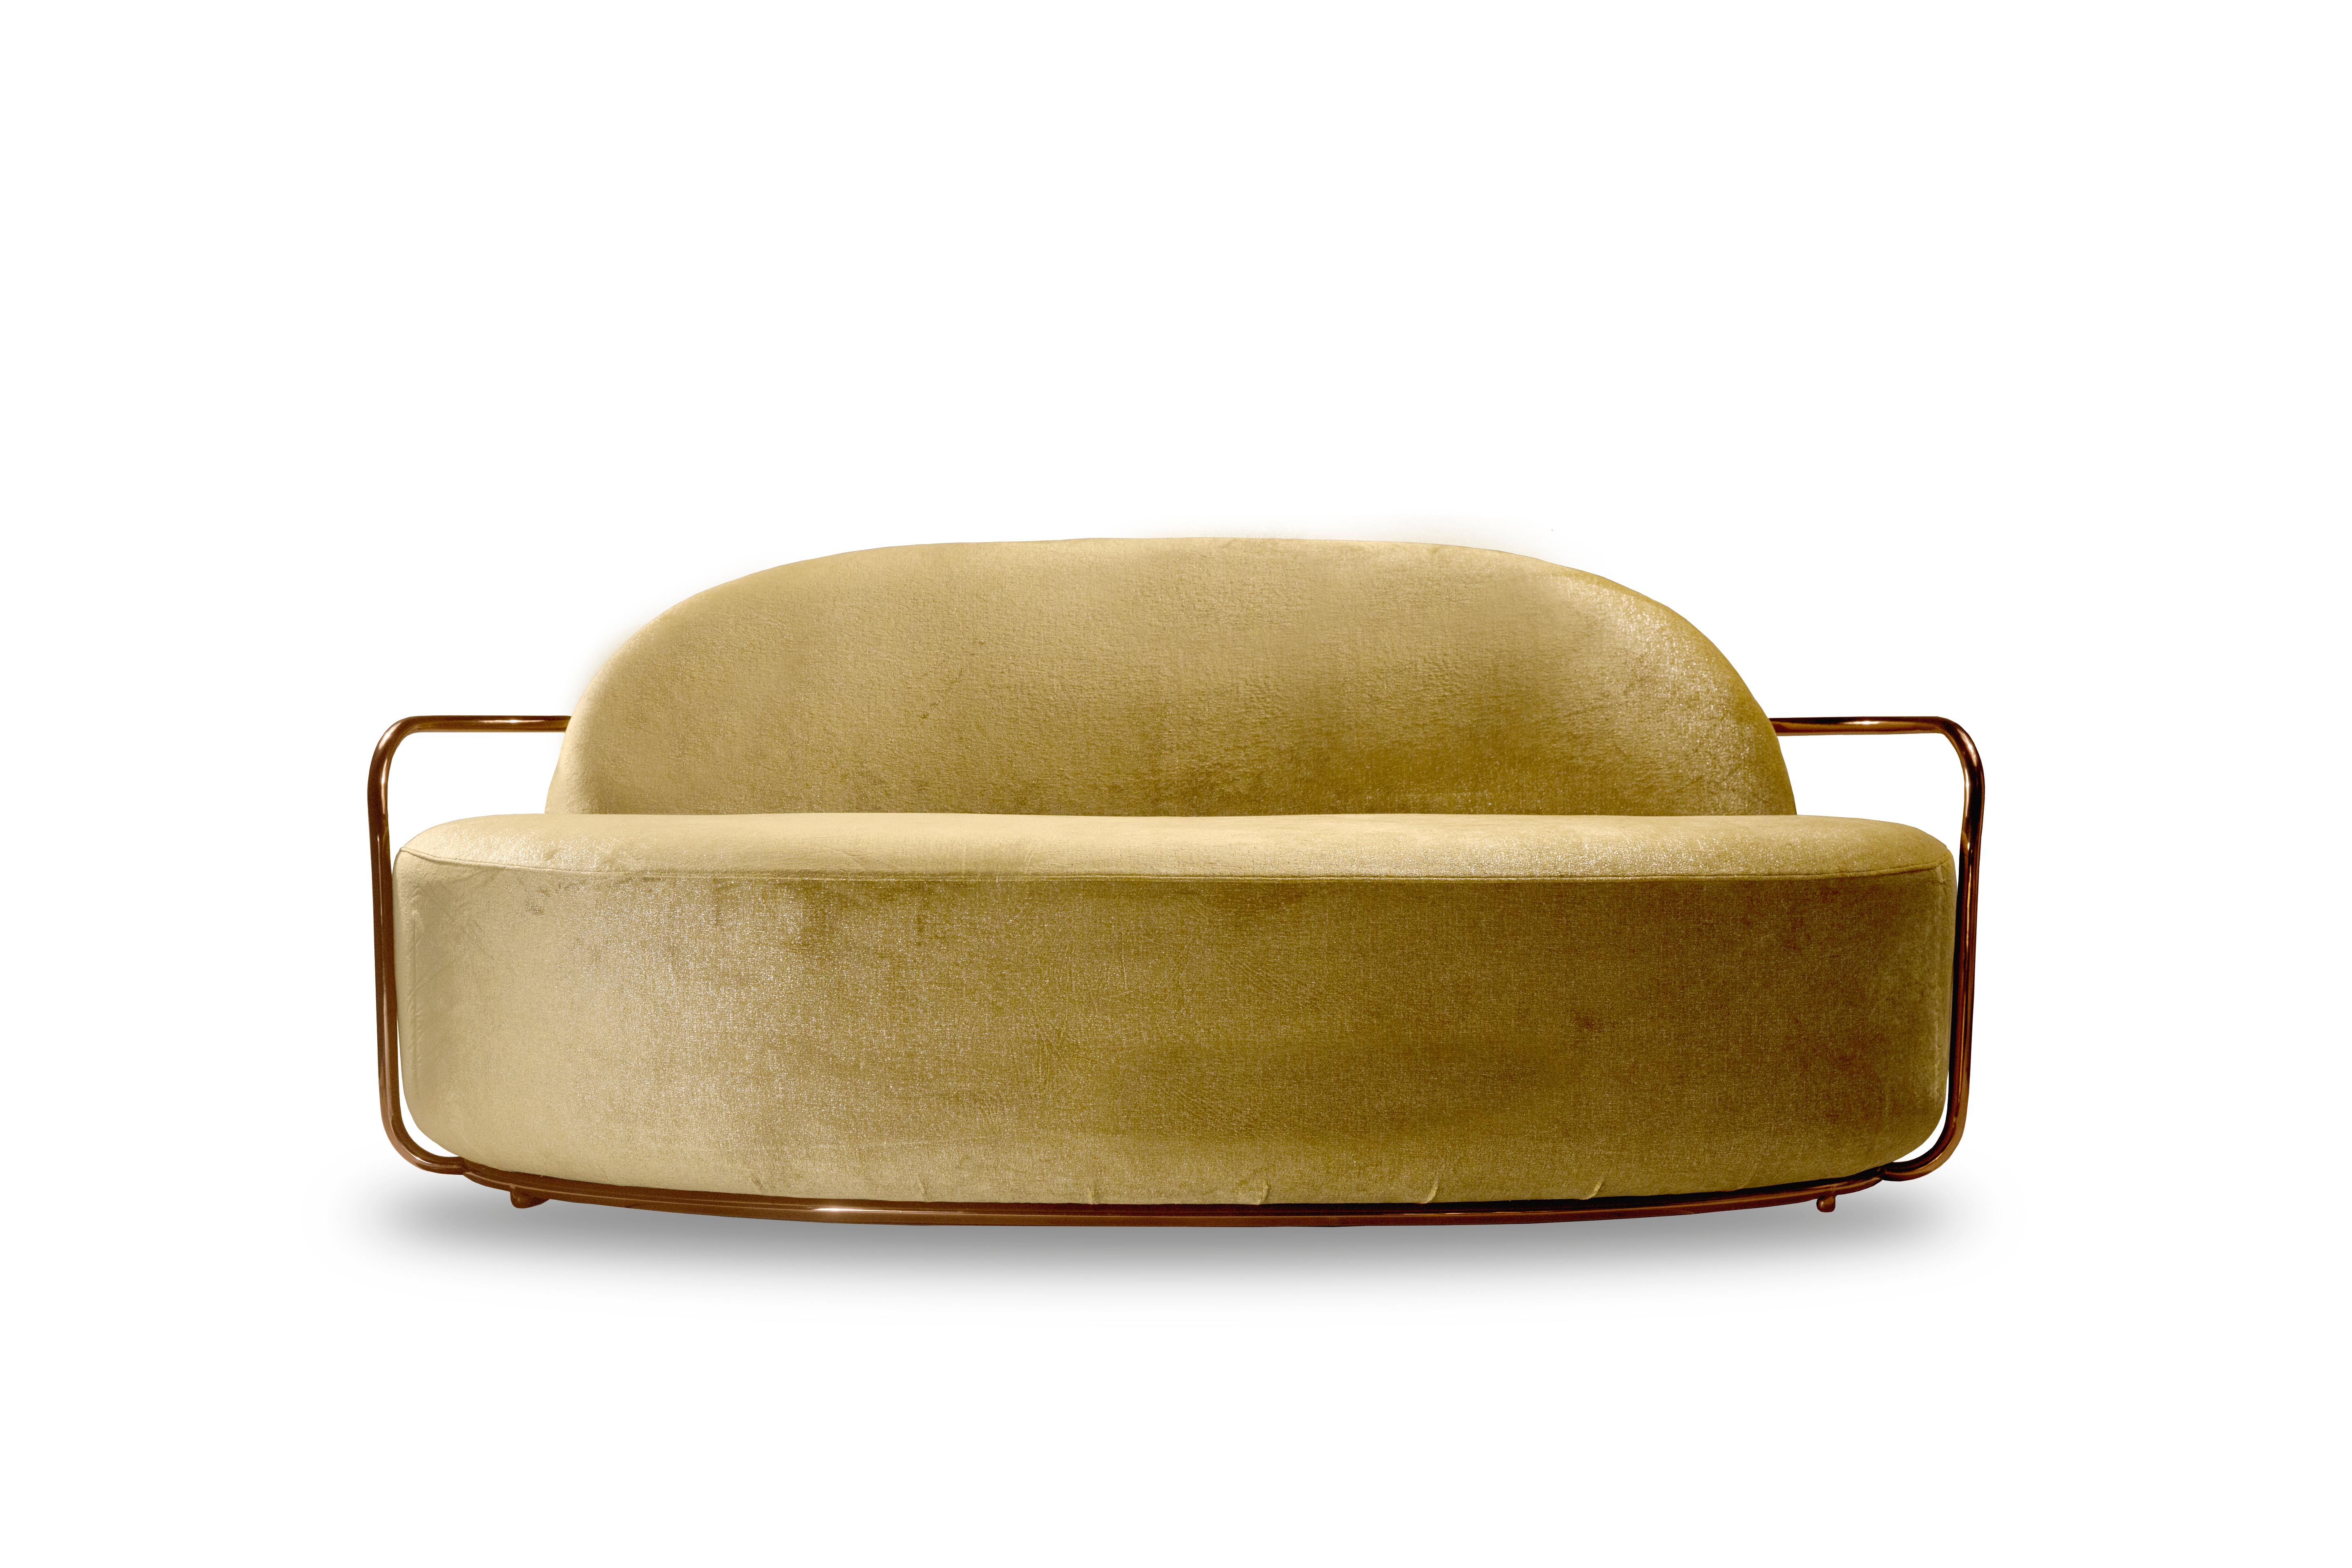 Orion sofa gold with Dedar Milano fabric by Nika Zupanc for Scarlet Splendour

The 88 constellations of the universe mysterious and magical, holding a promise to guide our destinies. Little wonder that they are the muse for the 88 Secrets, Nika